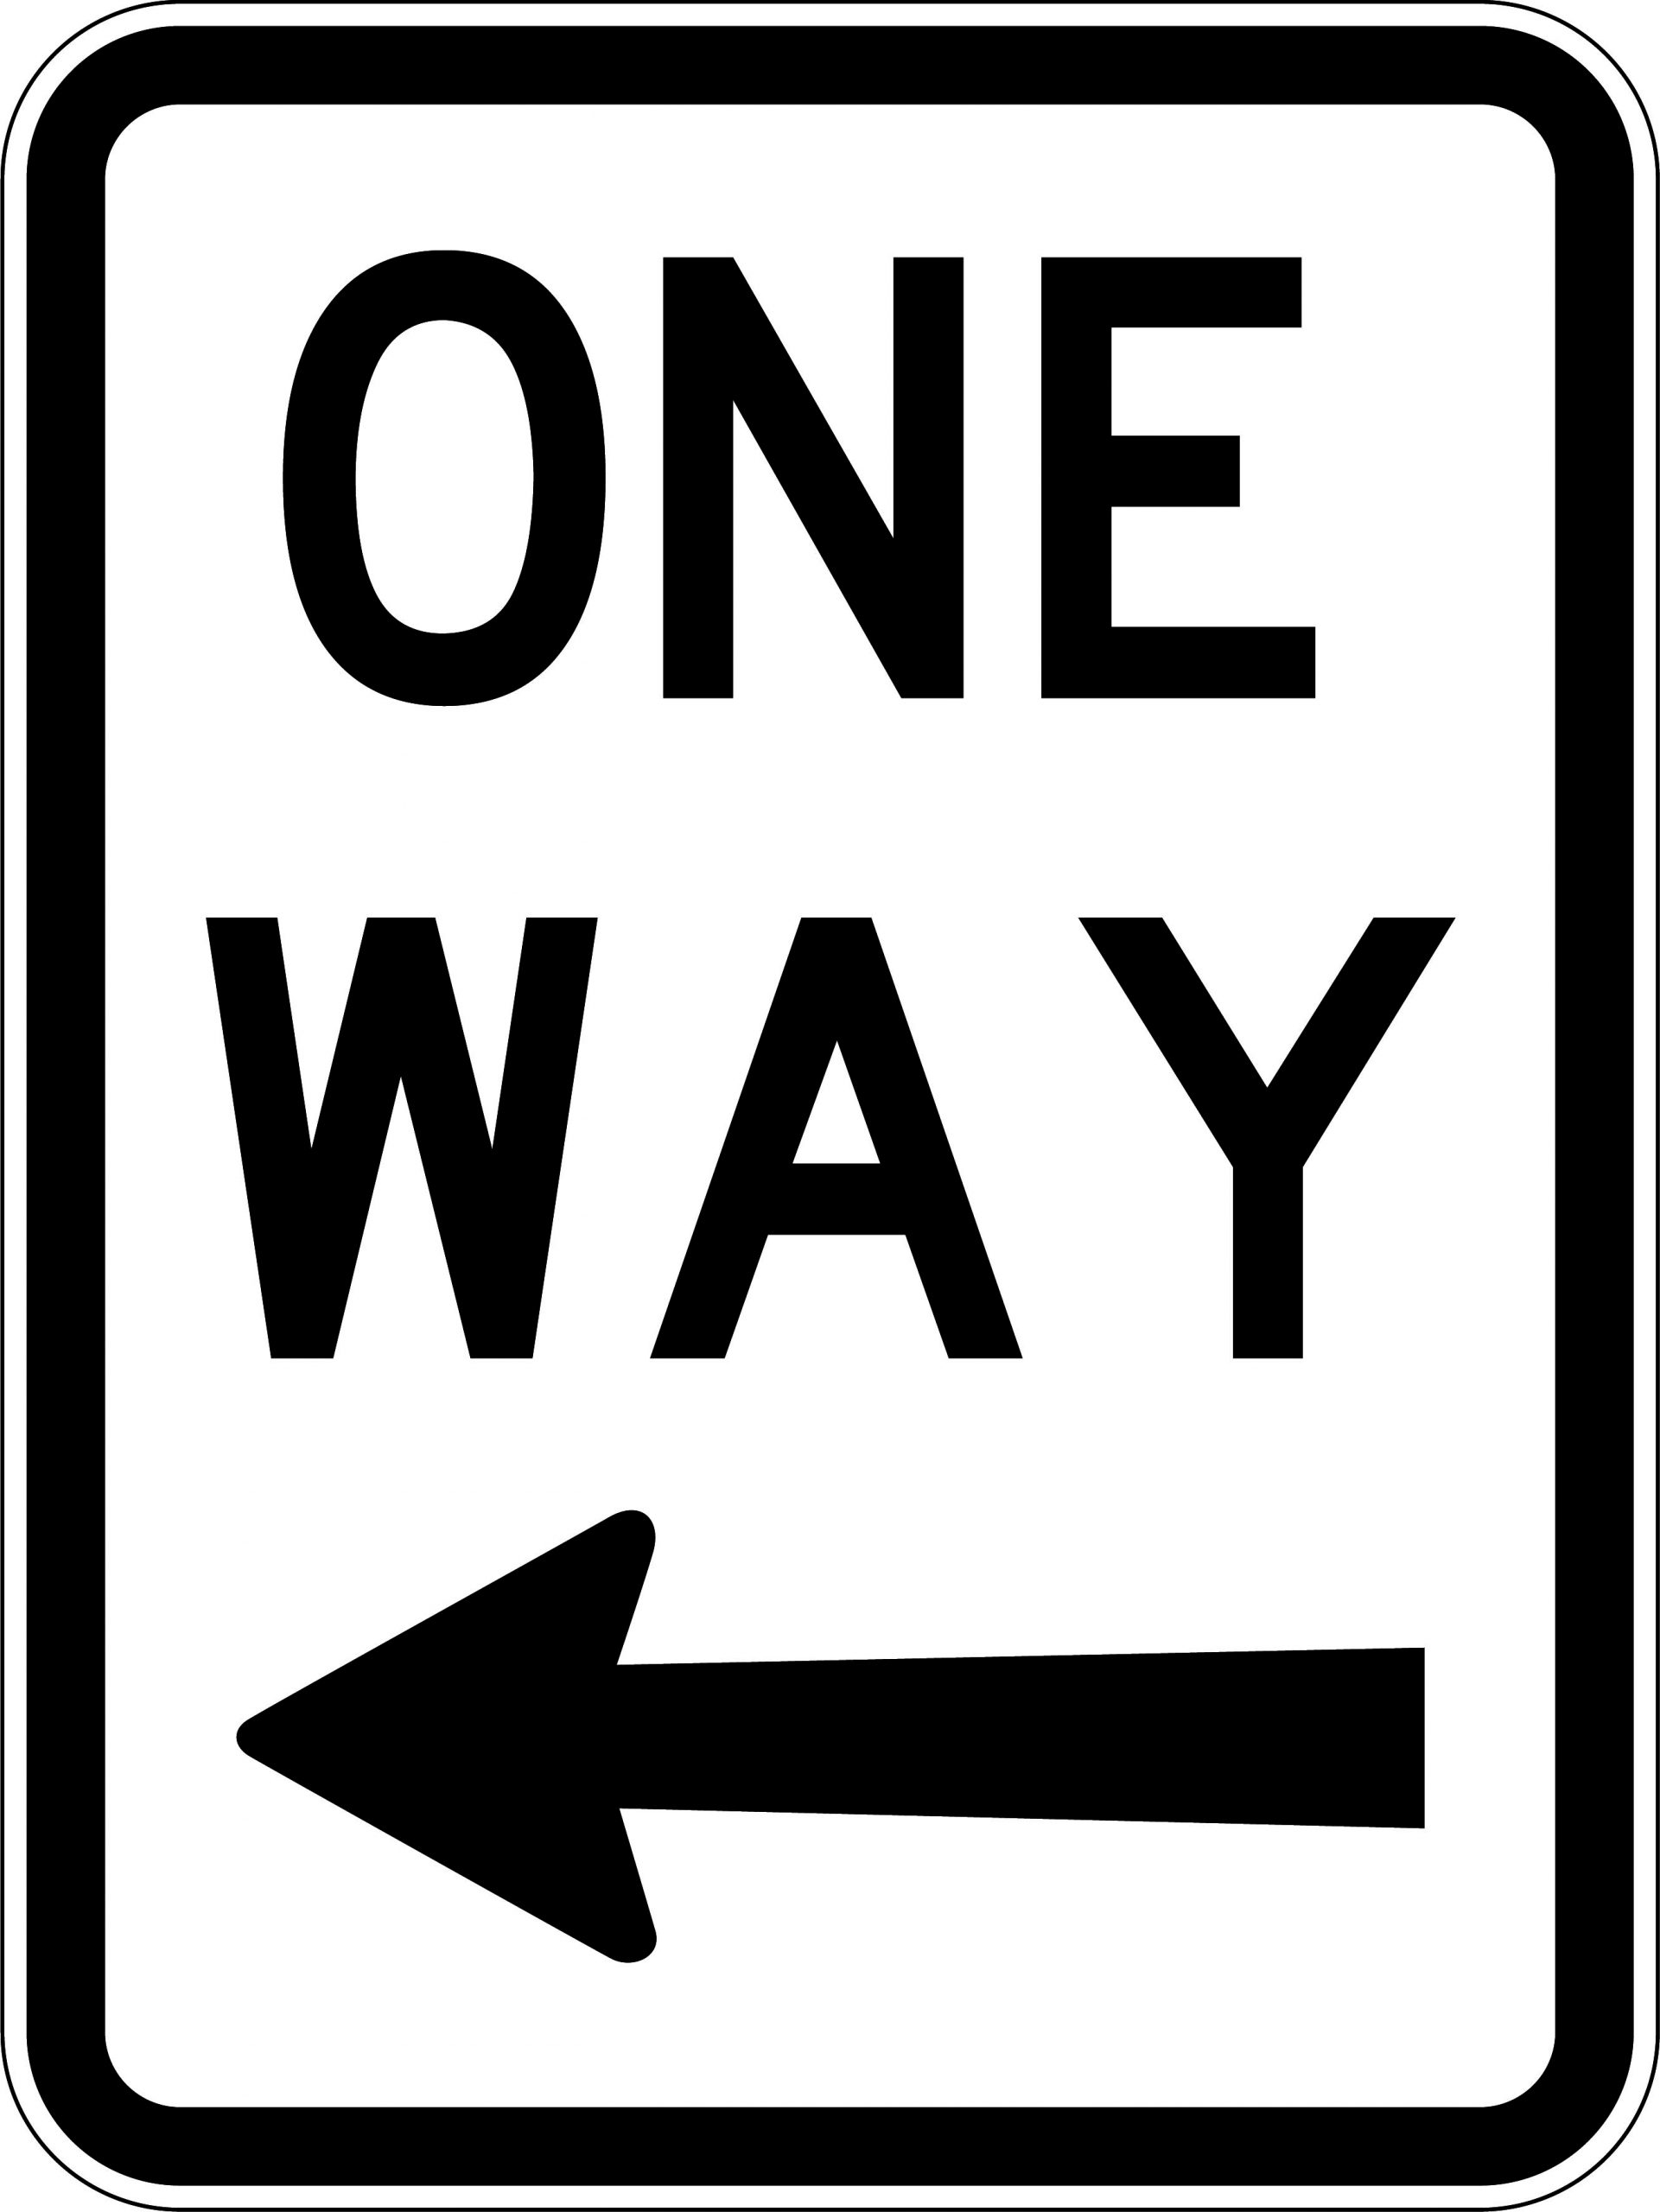 One Way (left or right arrow), Road Signs